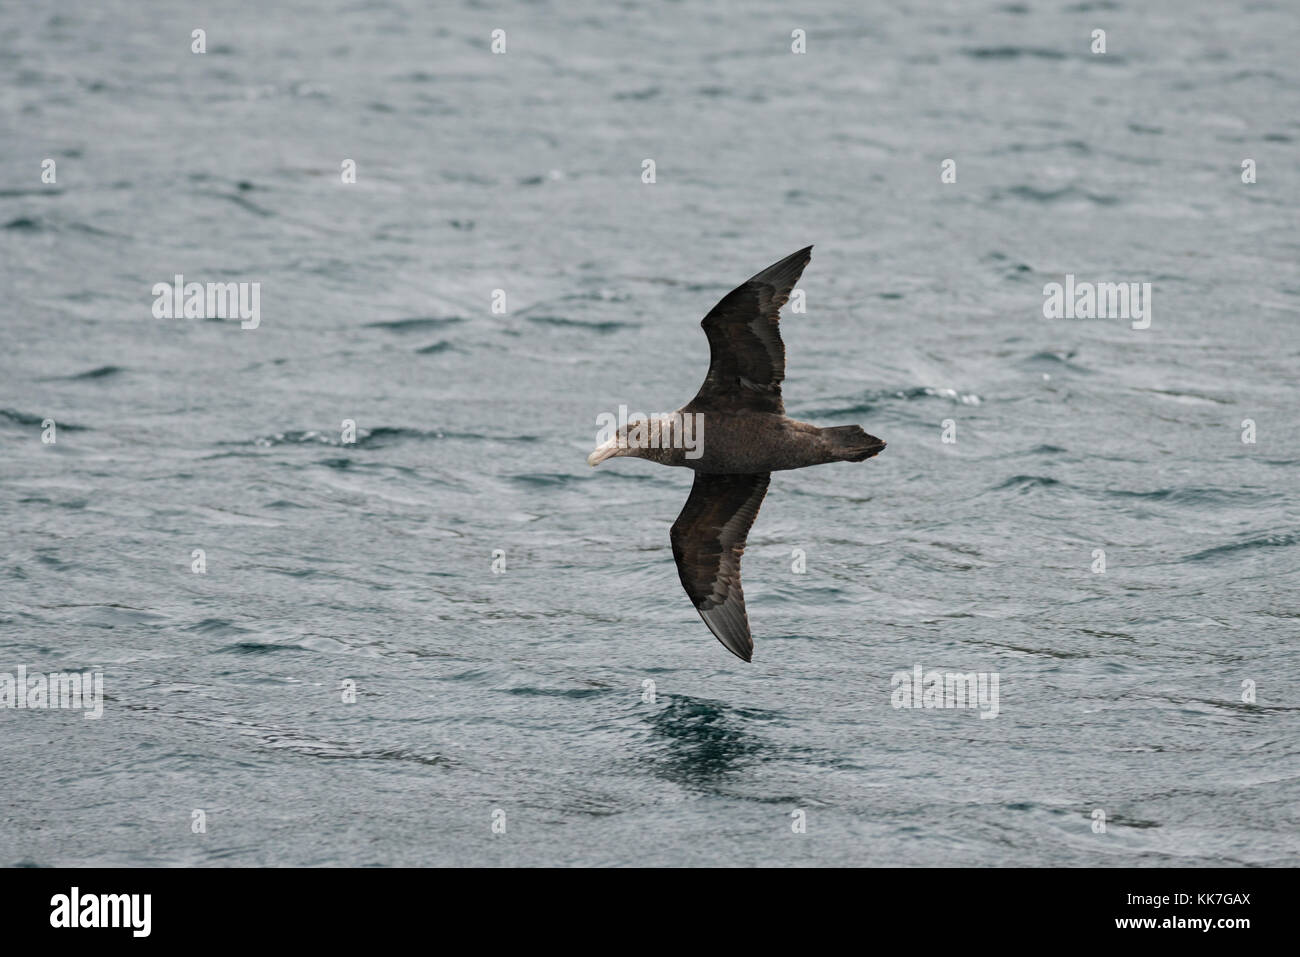 Southern Giant Petrel flying over the waters of the Straits of Magellan, Chile Stock Photo